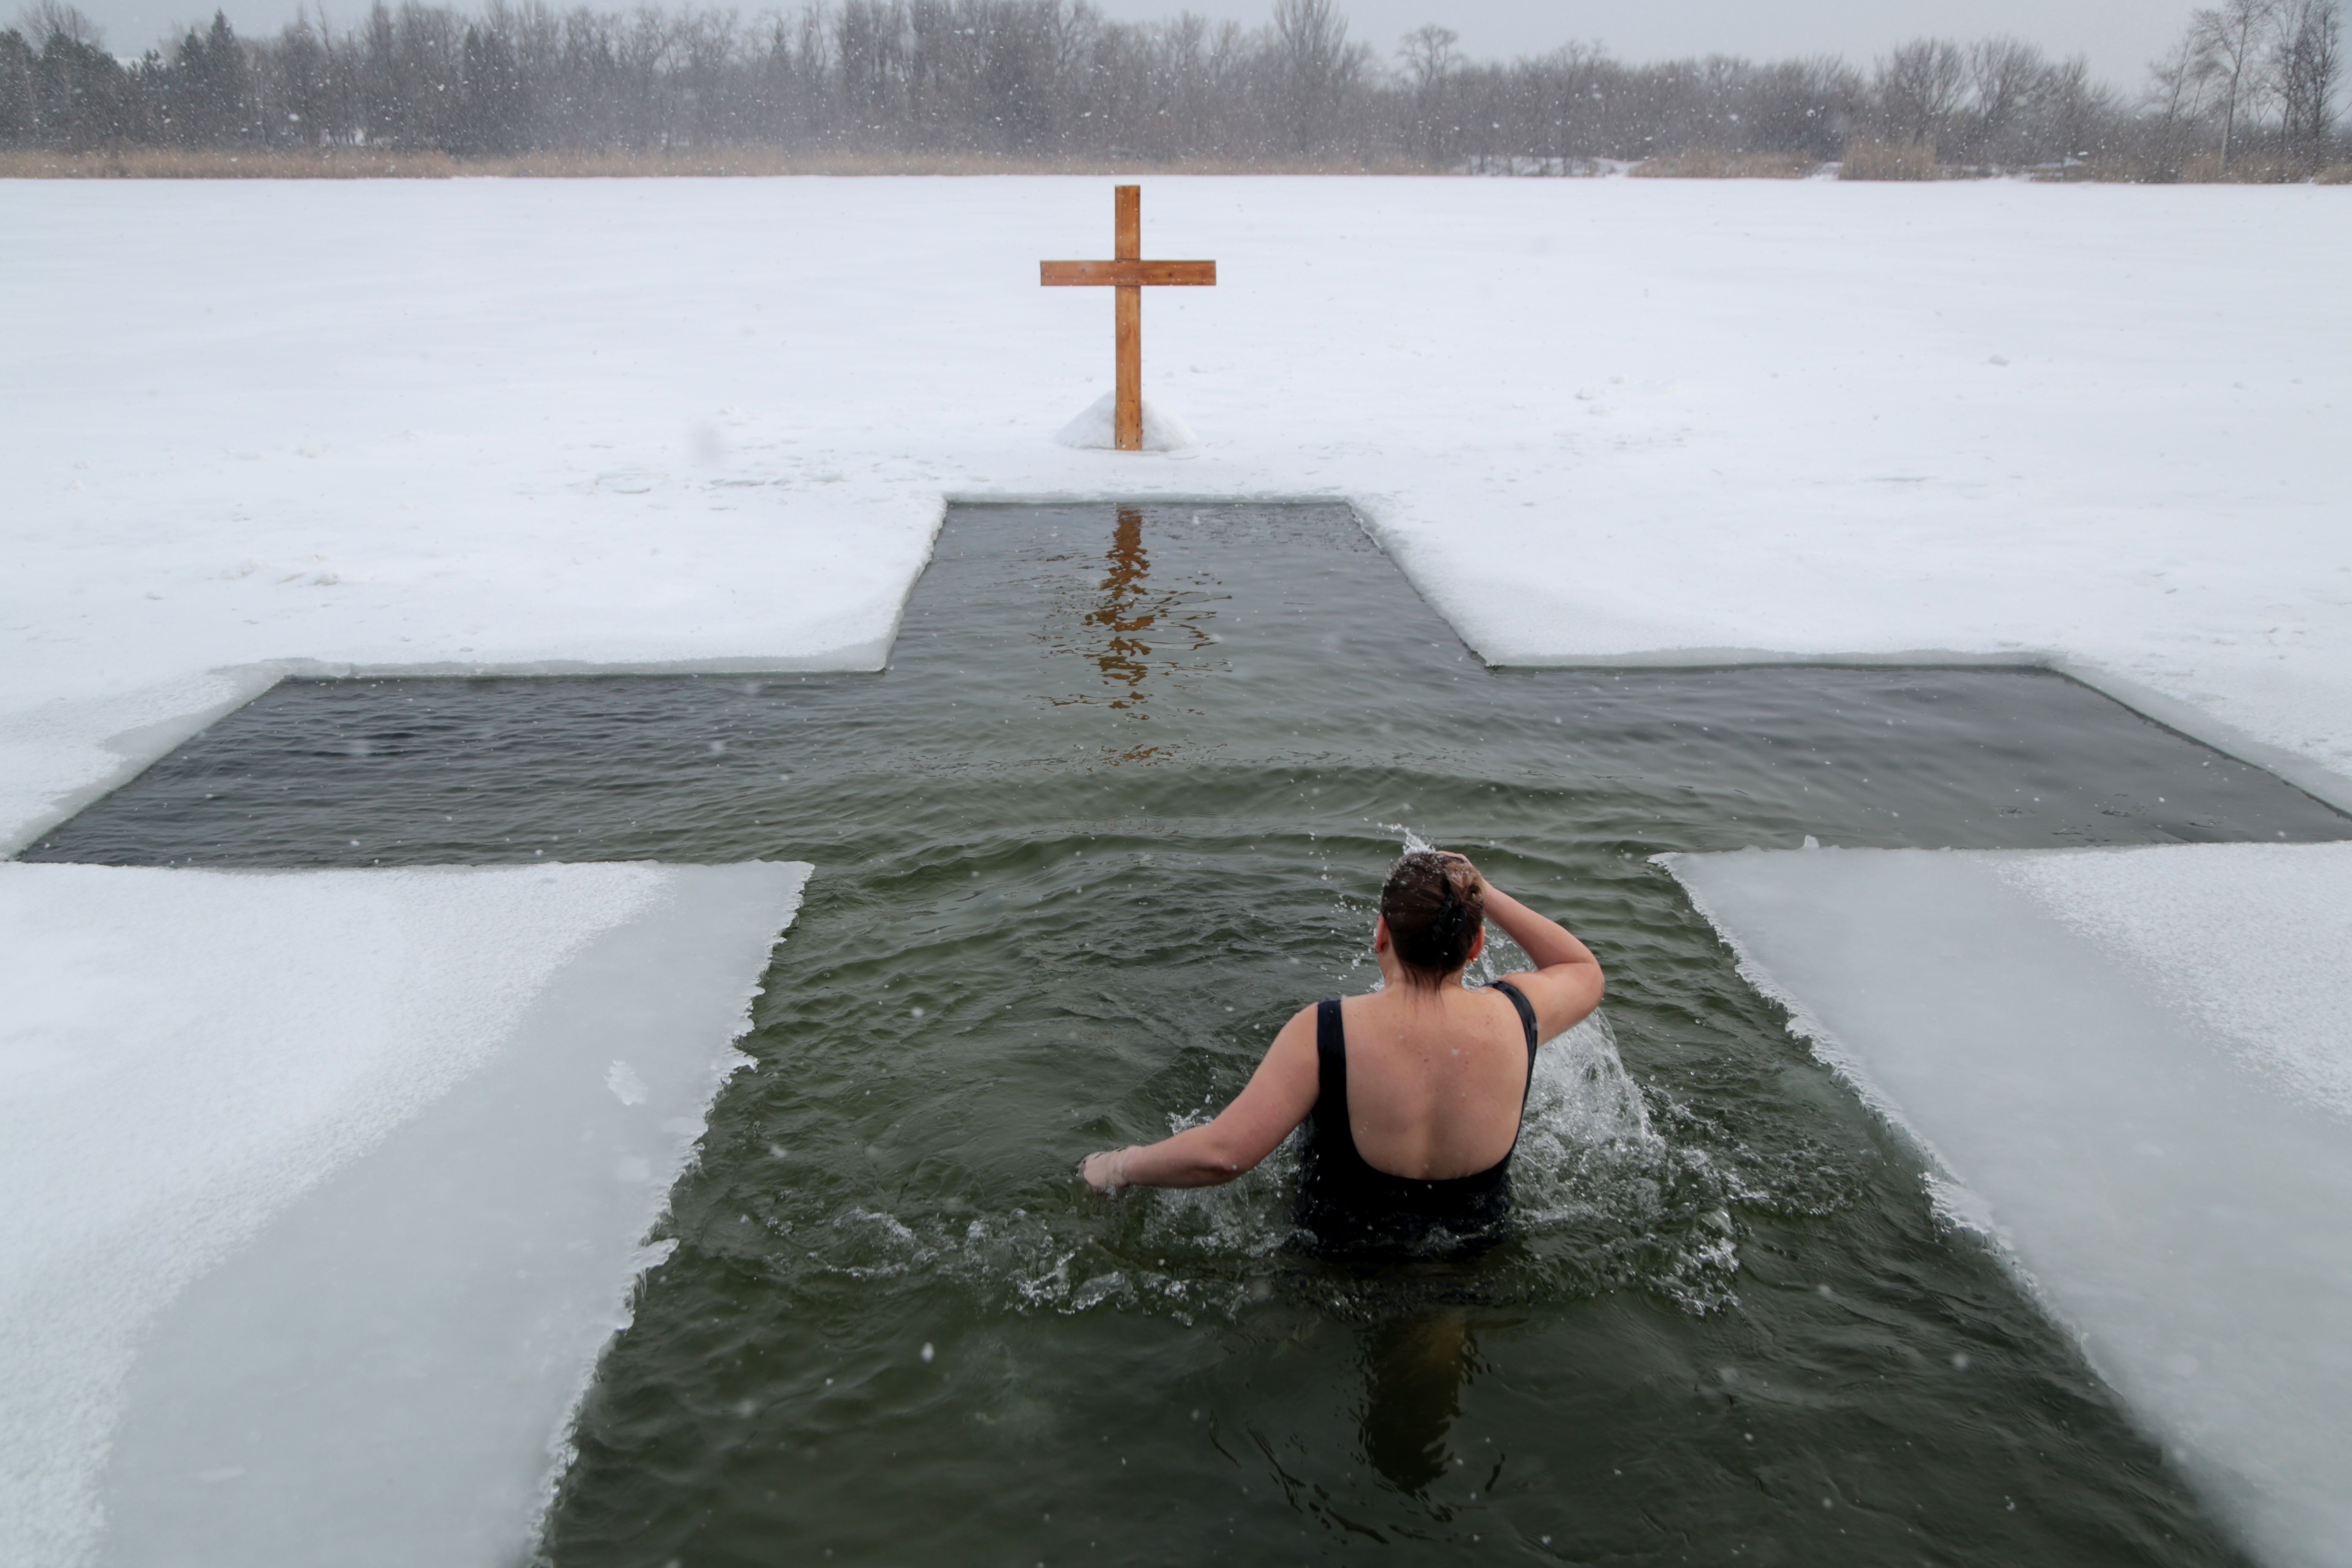 Photos show Orthodox Christians plunging into icy depths to mark Epiphany